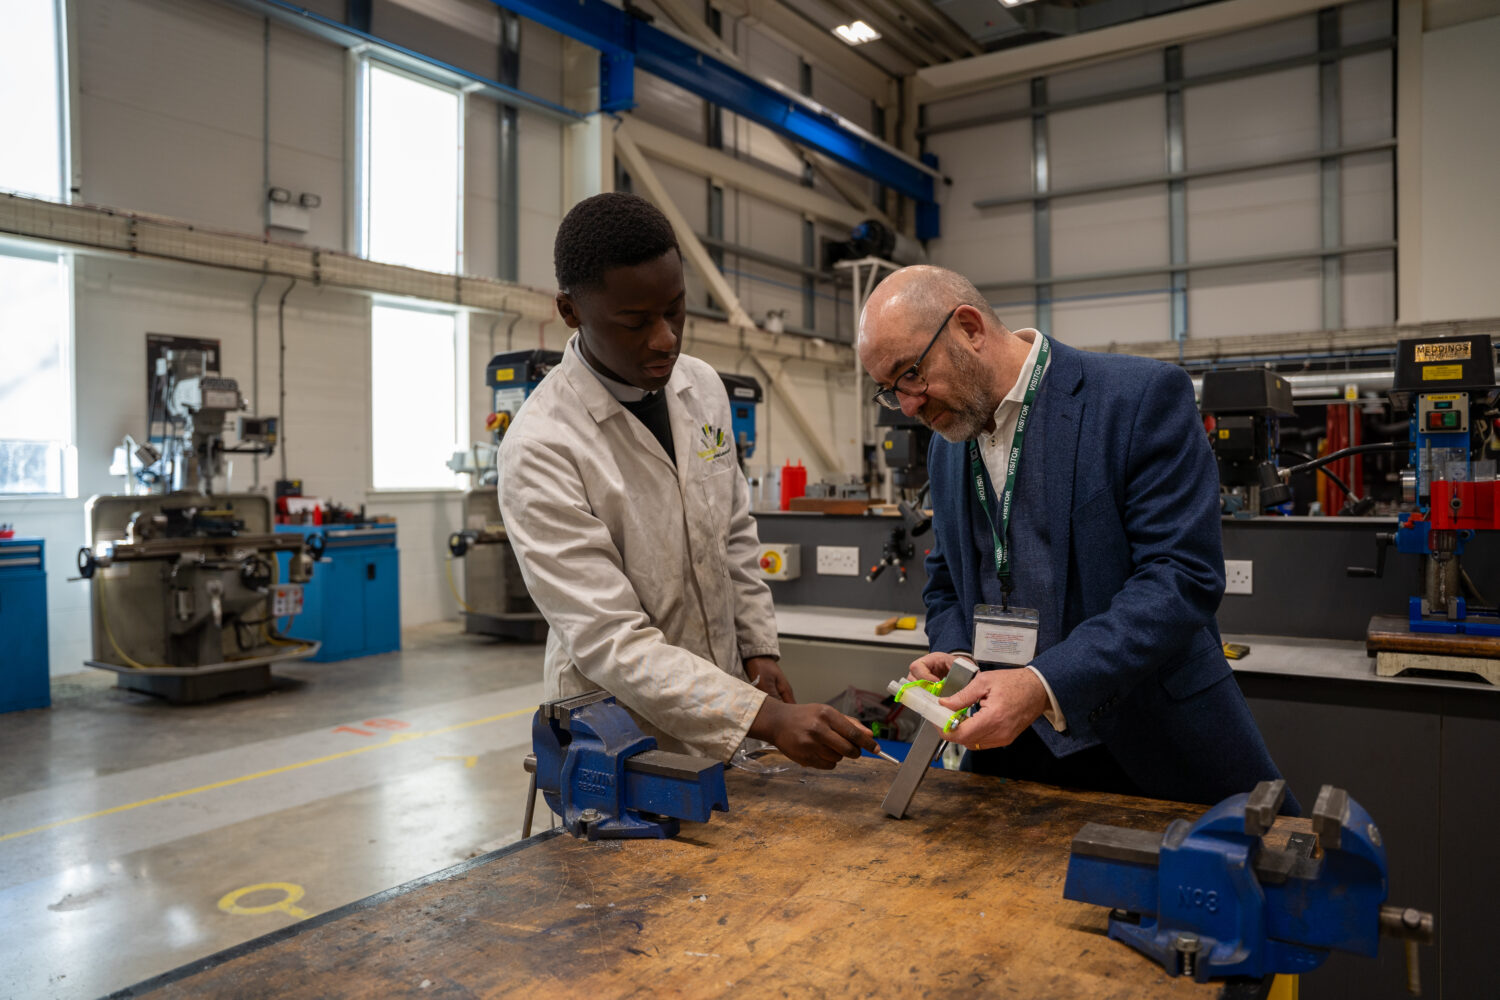 Labour minster looking at a machine with a student